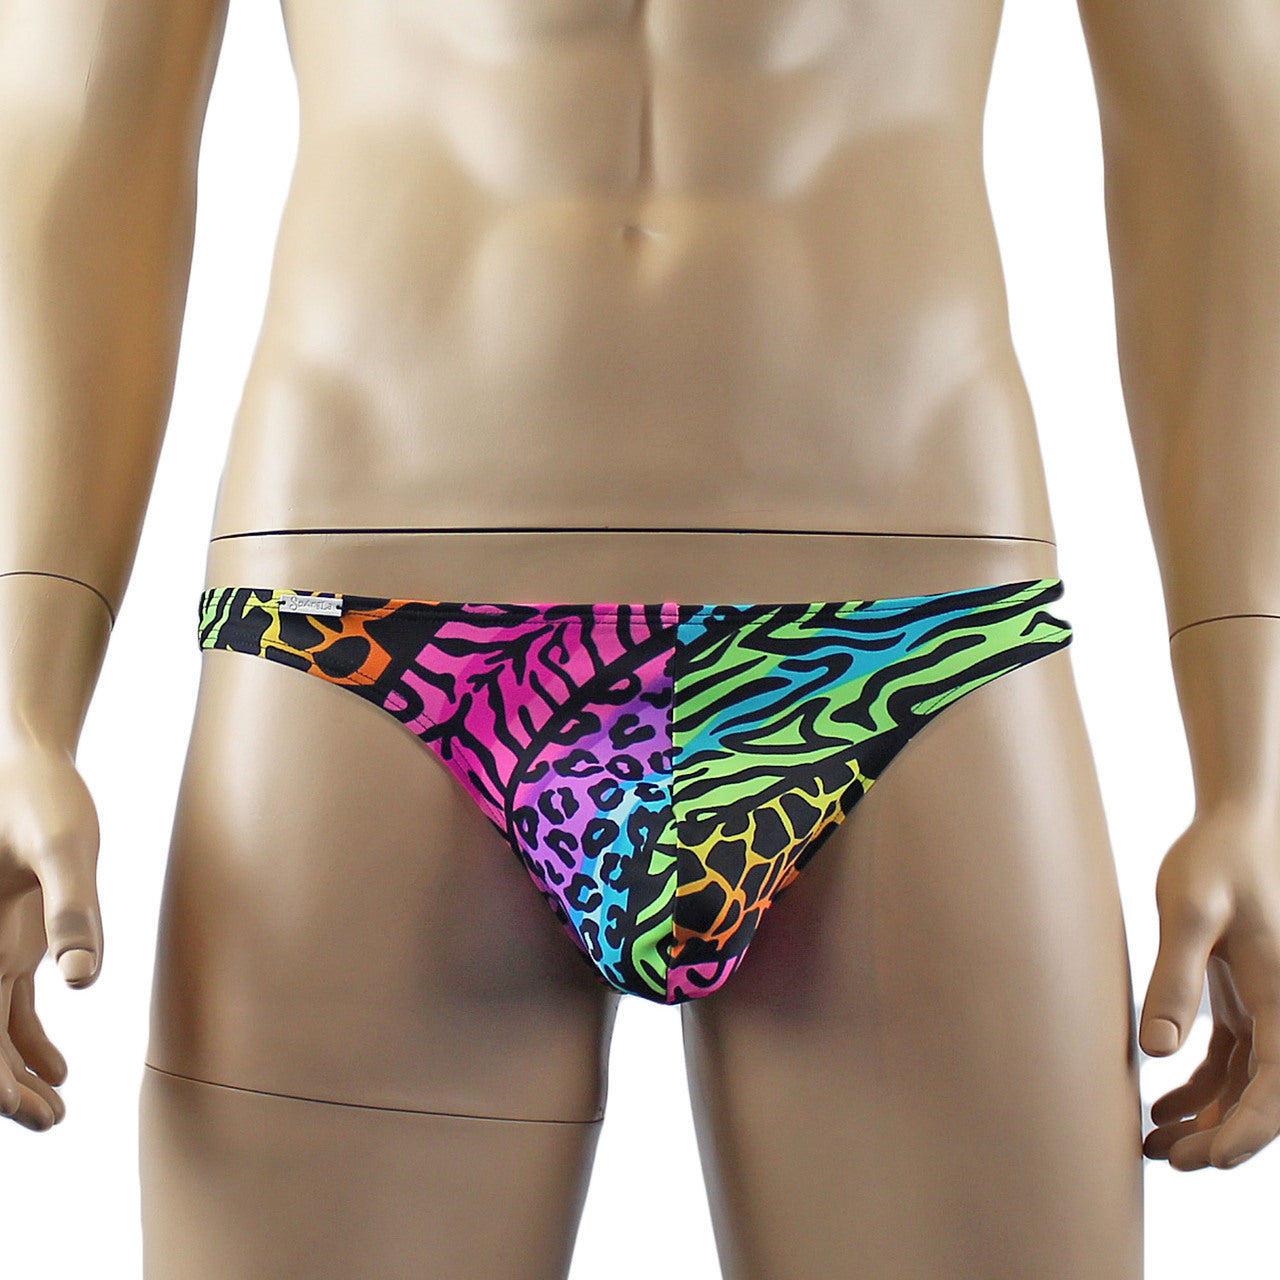 Mens Festival Animal Bra Top and Low Rise Thong Underwear Multi-coloured